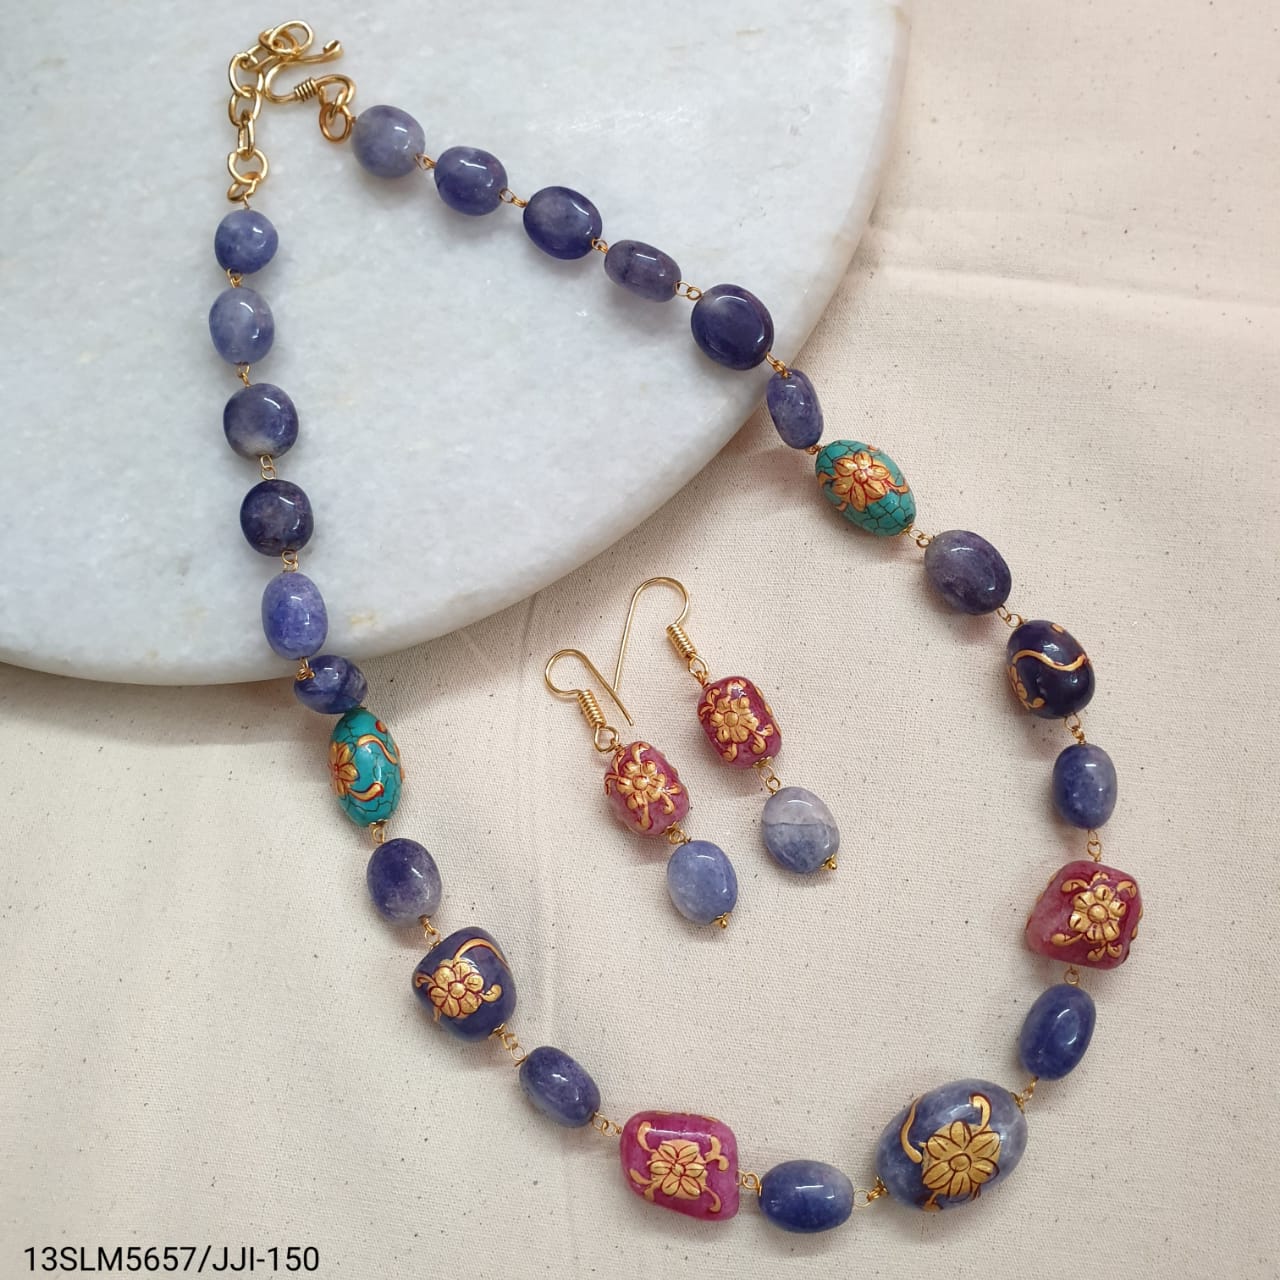 Blue Handpainted Bead Stone Necklace With Earrings